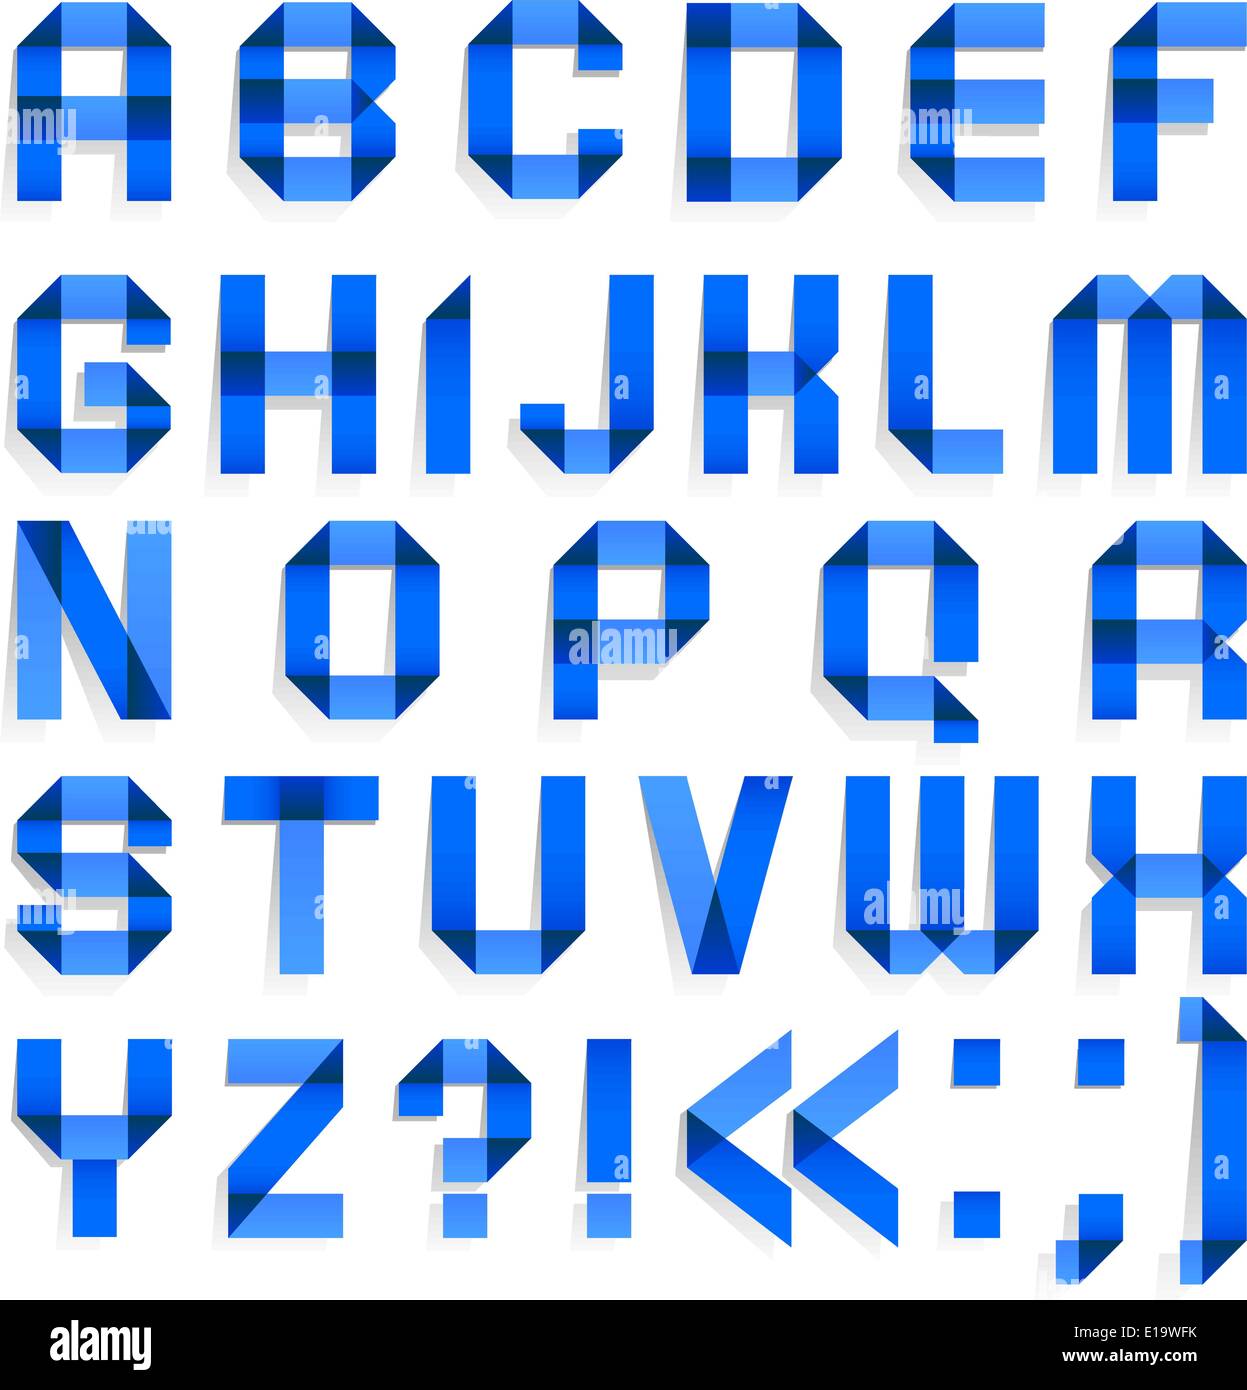 Alphabet Folded Of Colored Paper Blue Letters A B C D E F G H I J K L M N O P Q R S T U V W X